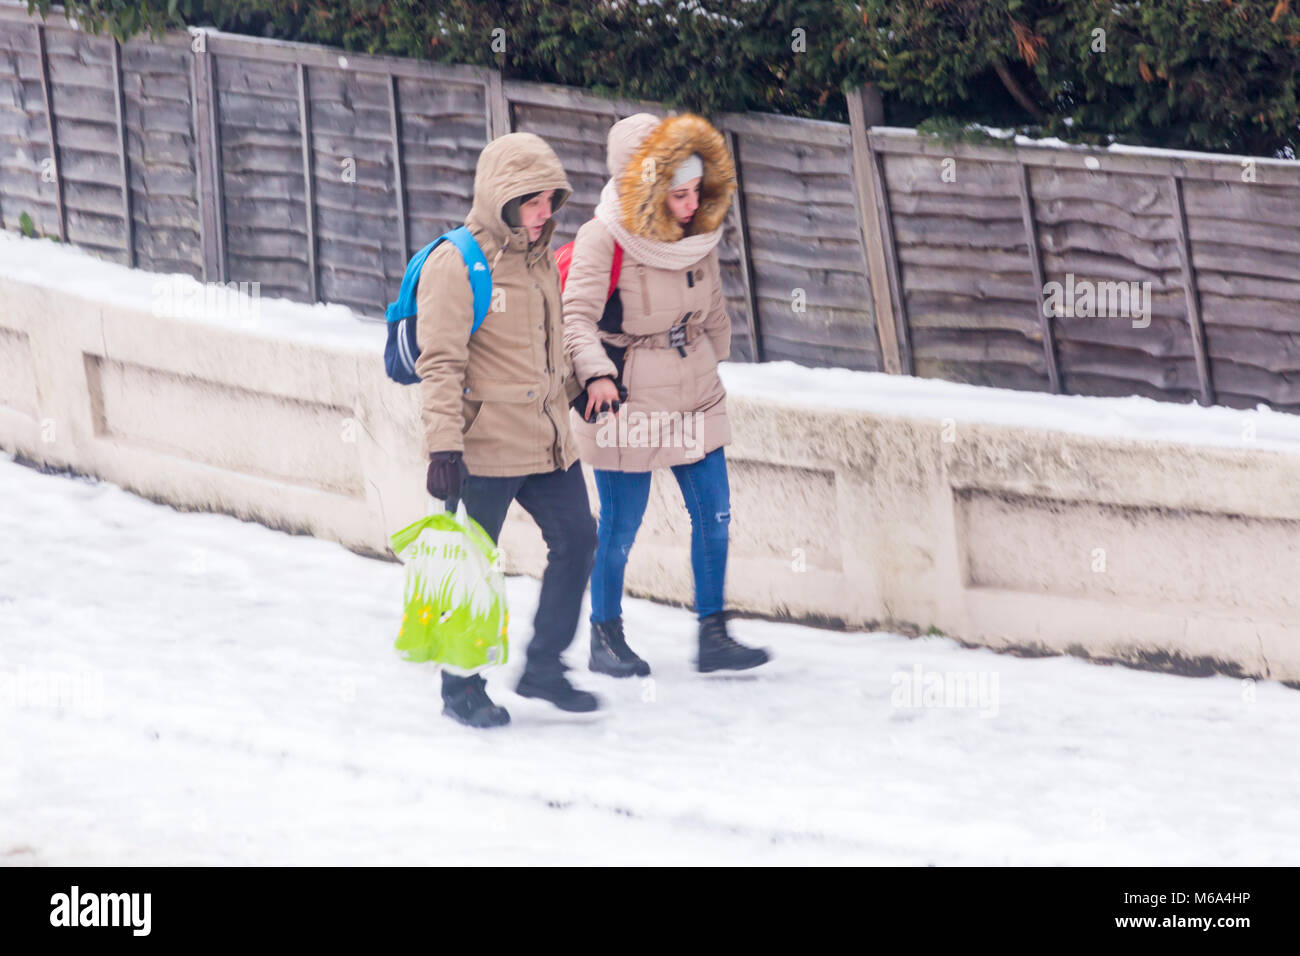 Bournemouth, Dorset, UK. 2nd March, 2018. UK weather: yesterdays snow has turned icy leading to treacherous conditions on the roads and pavements in Bournemouth. A couple precariously walk hand in hand along the pavement. Credit: Carolyn Jenkins/Alamy Live News Stock Photo